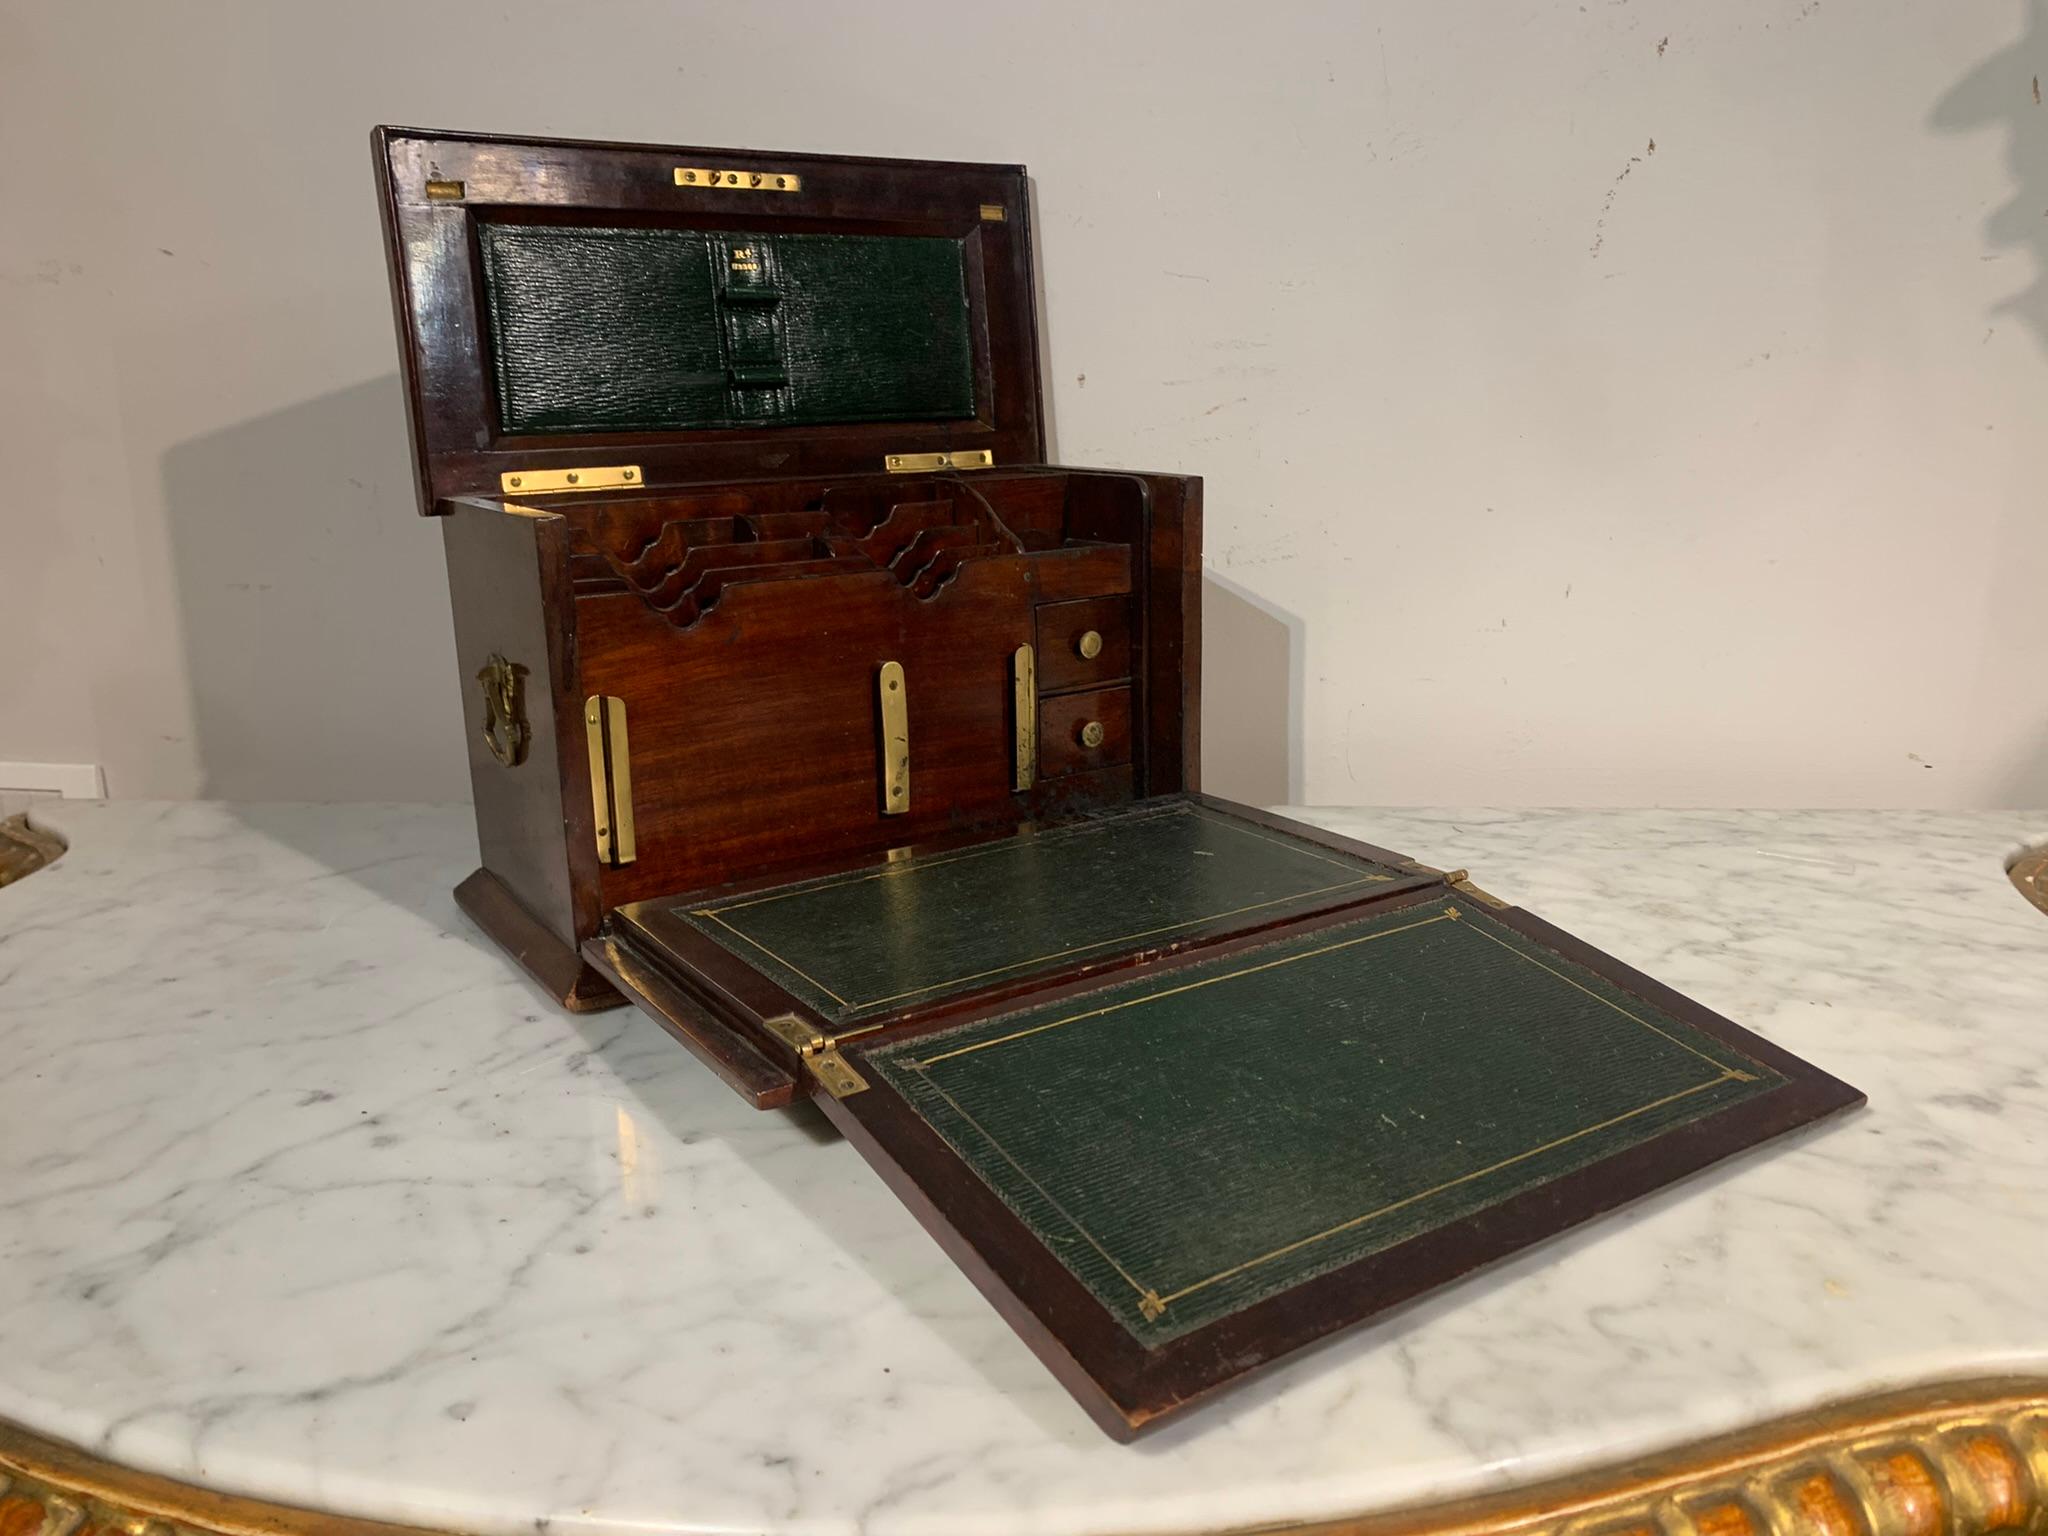 Travel writing desk in solid mahogany, interior divided into inserts for letters, ink flask, small drawers for pens and surfaces covered in textured leather. Closed it becomes a transportable box.
English manufacture from the end of the 19th century.